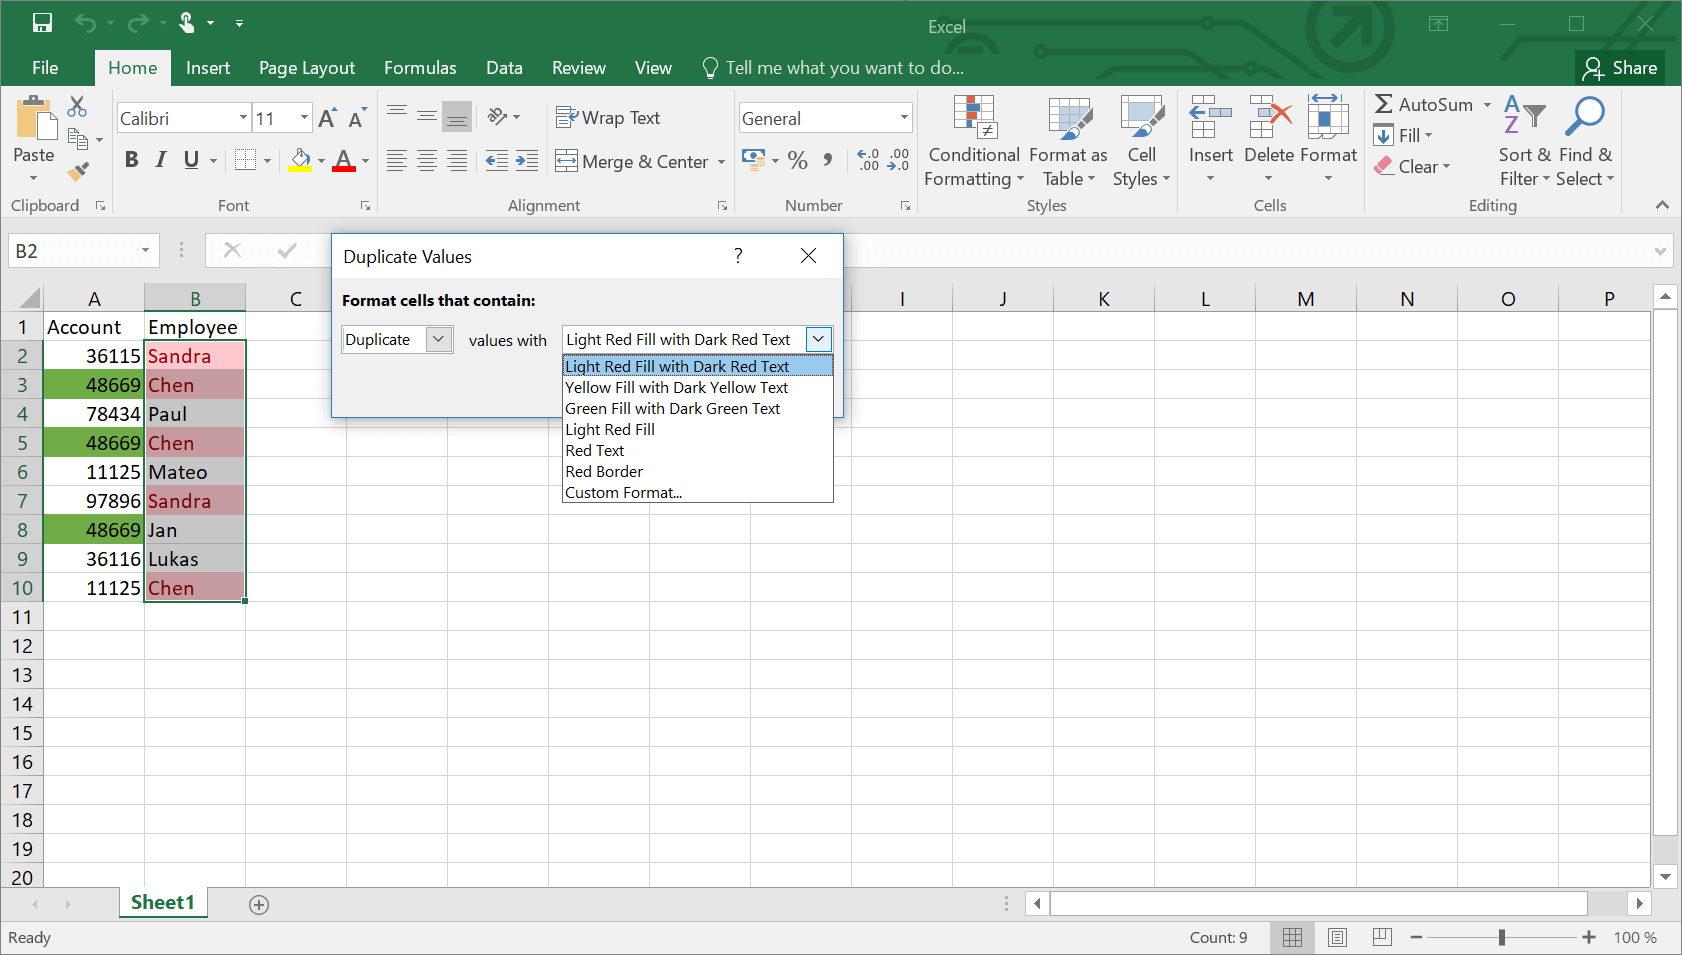 Possible settings for the “Duplicate Values” function